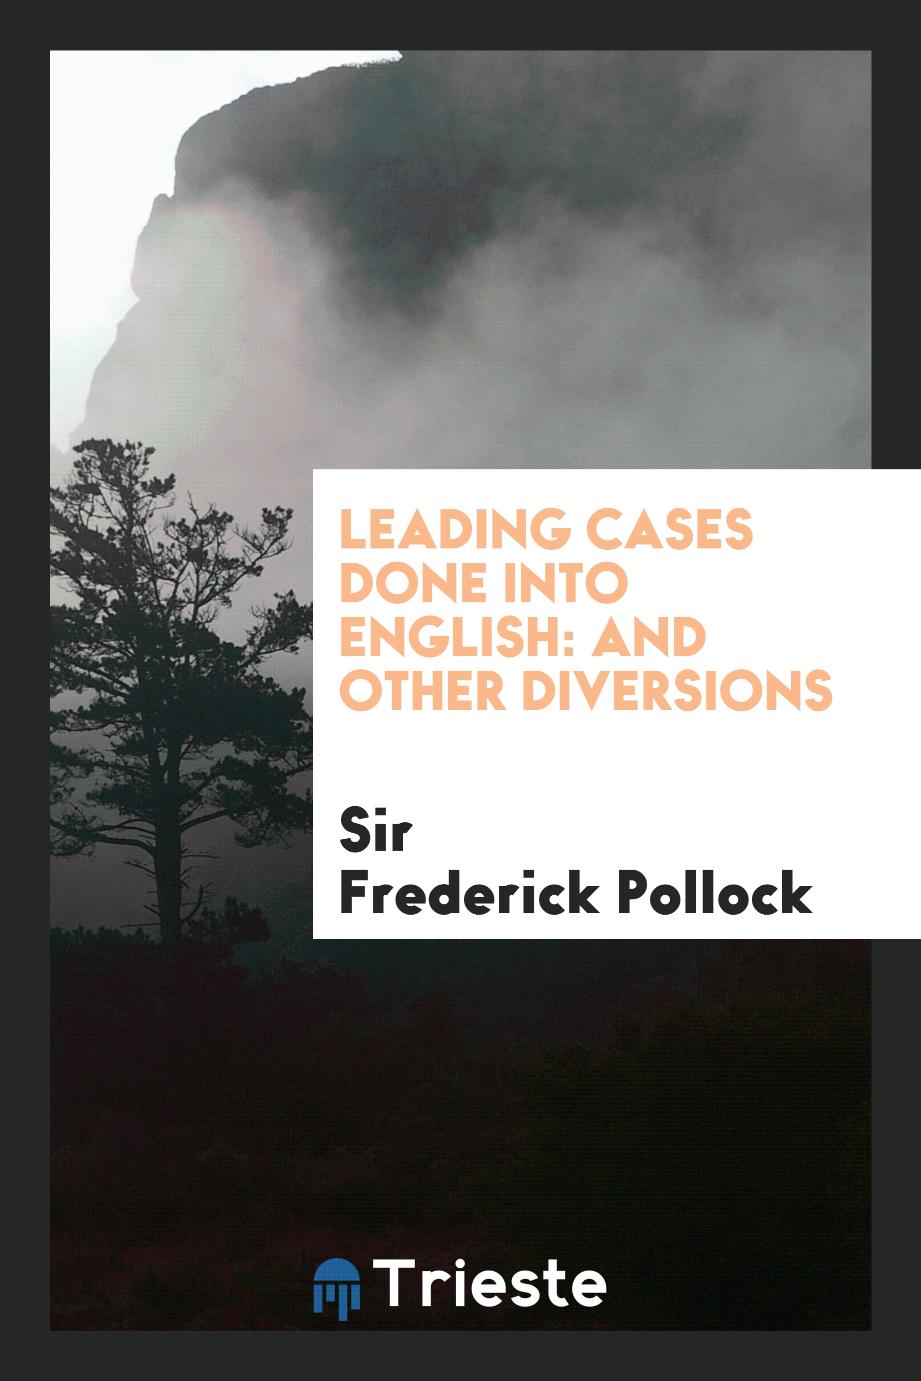 Leading Cases Done Into English: And Other Diversions